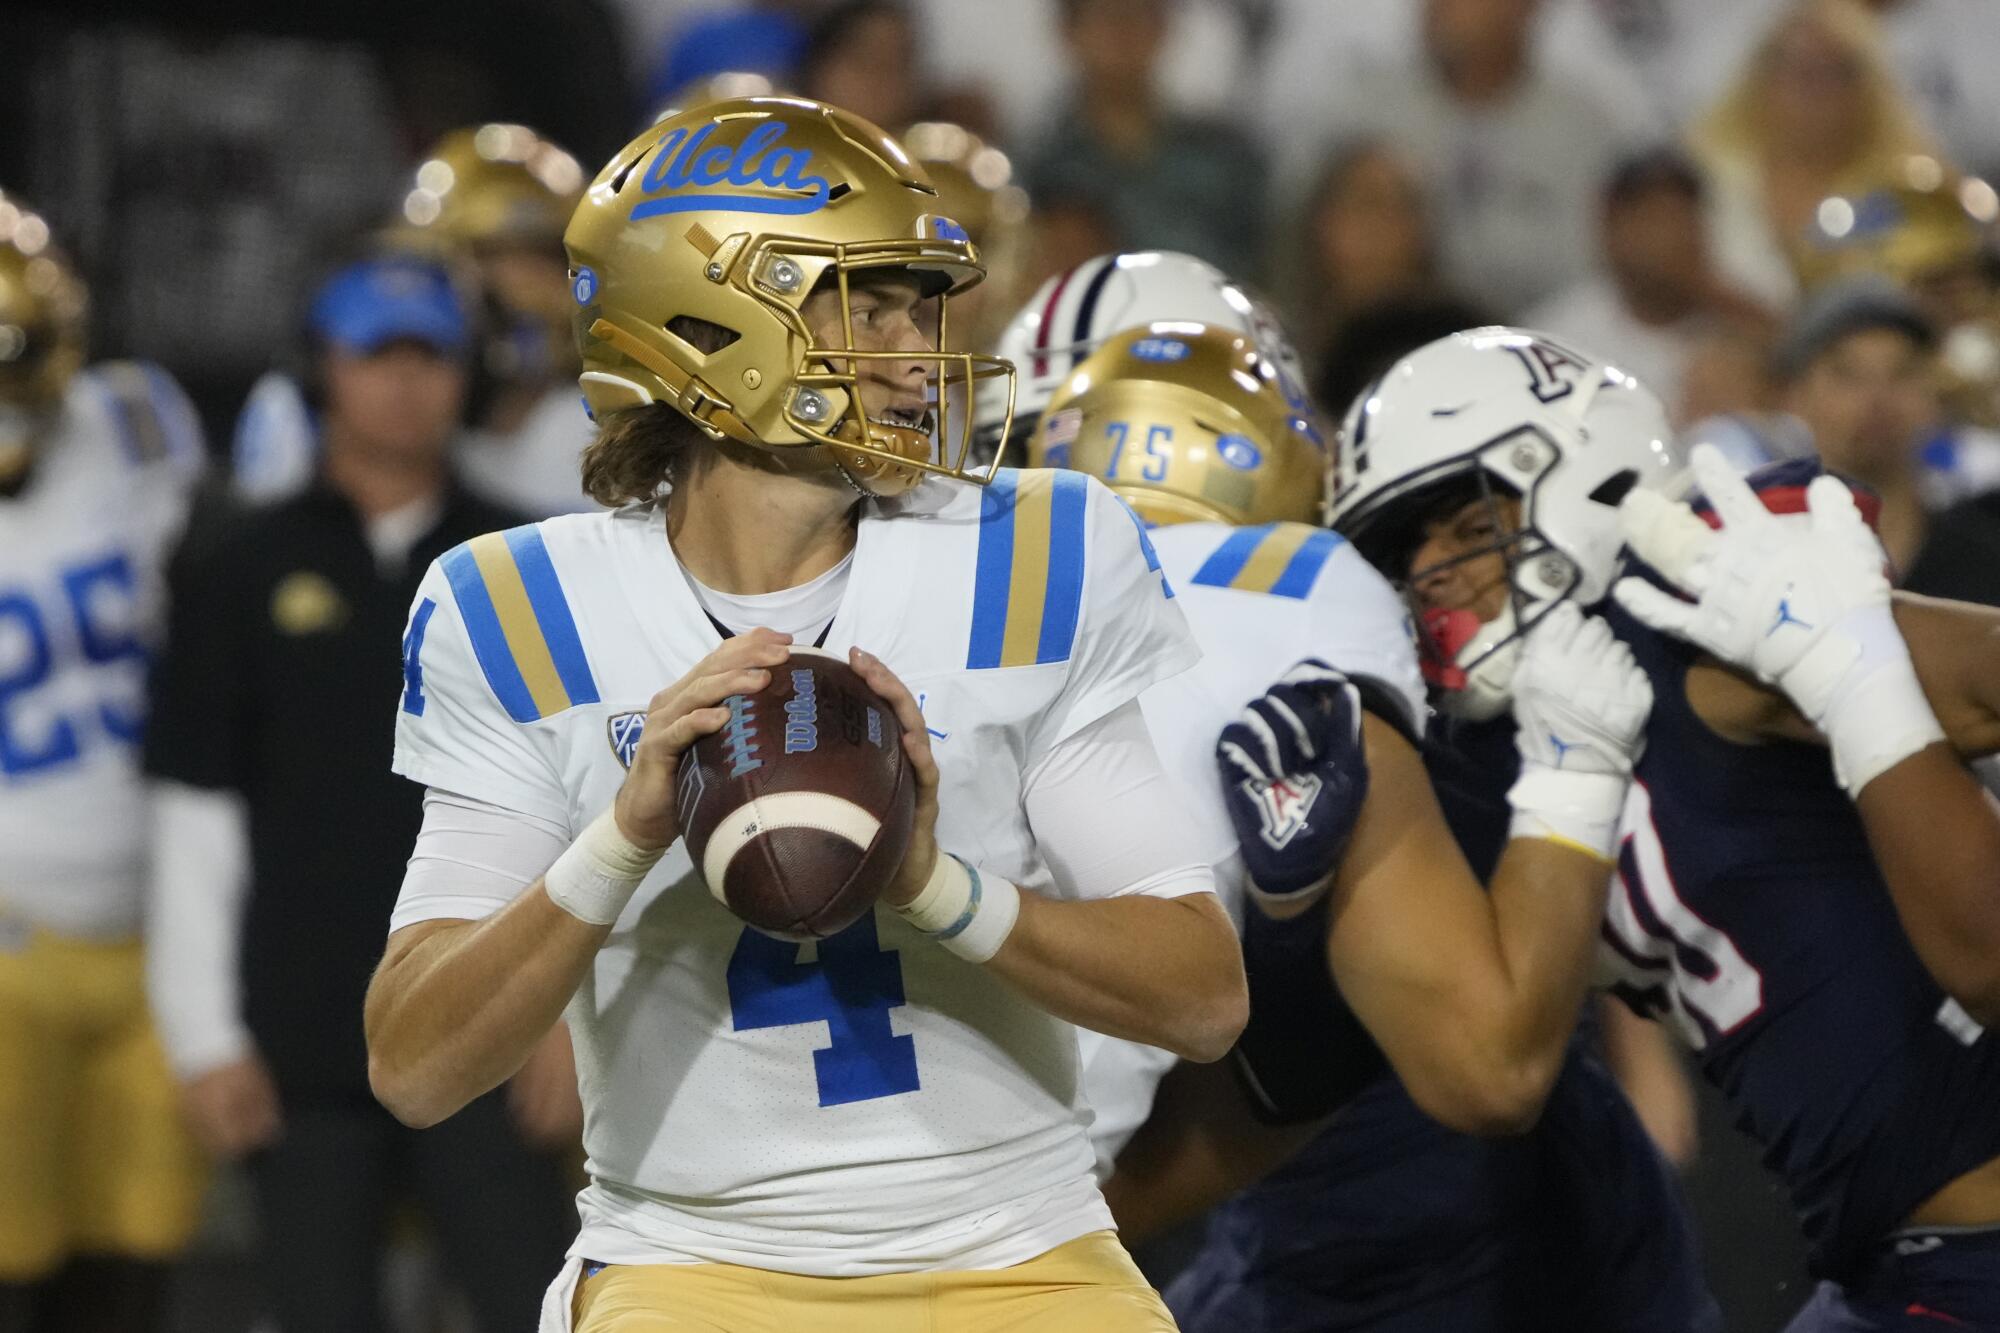 UCLA quarterback Ethan Garbers looks for a receiver during the first half.